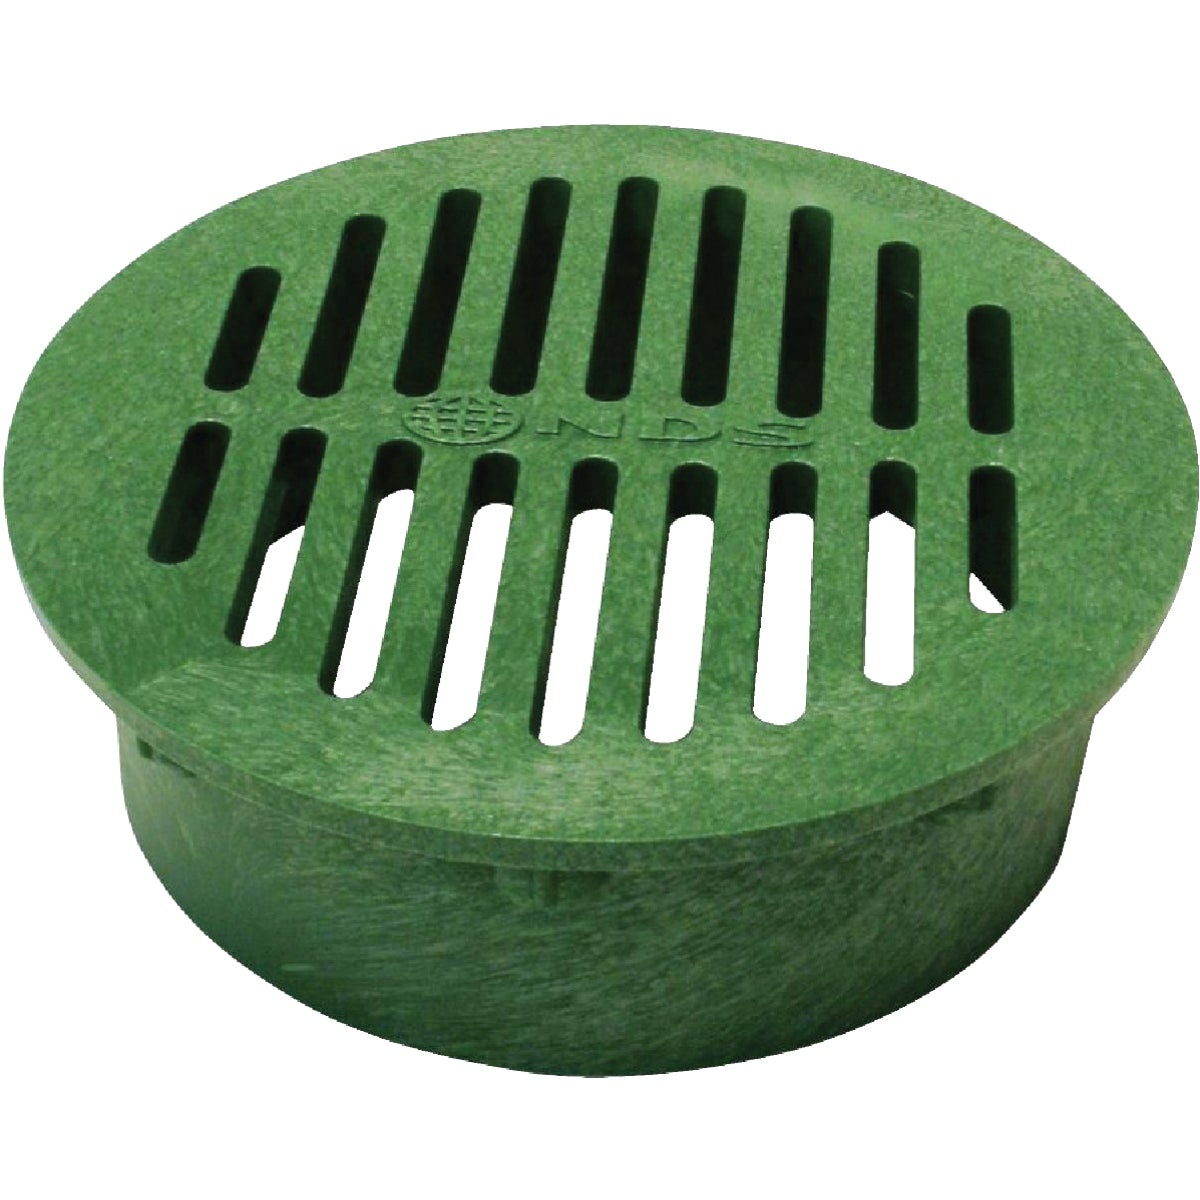 Item 429309, 8" round structural foam polyethylene grate with UV inhibitors.